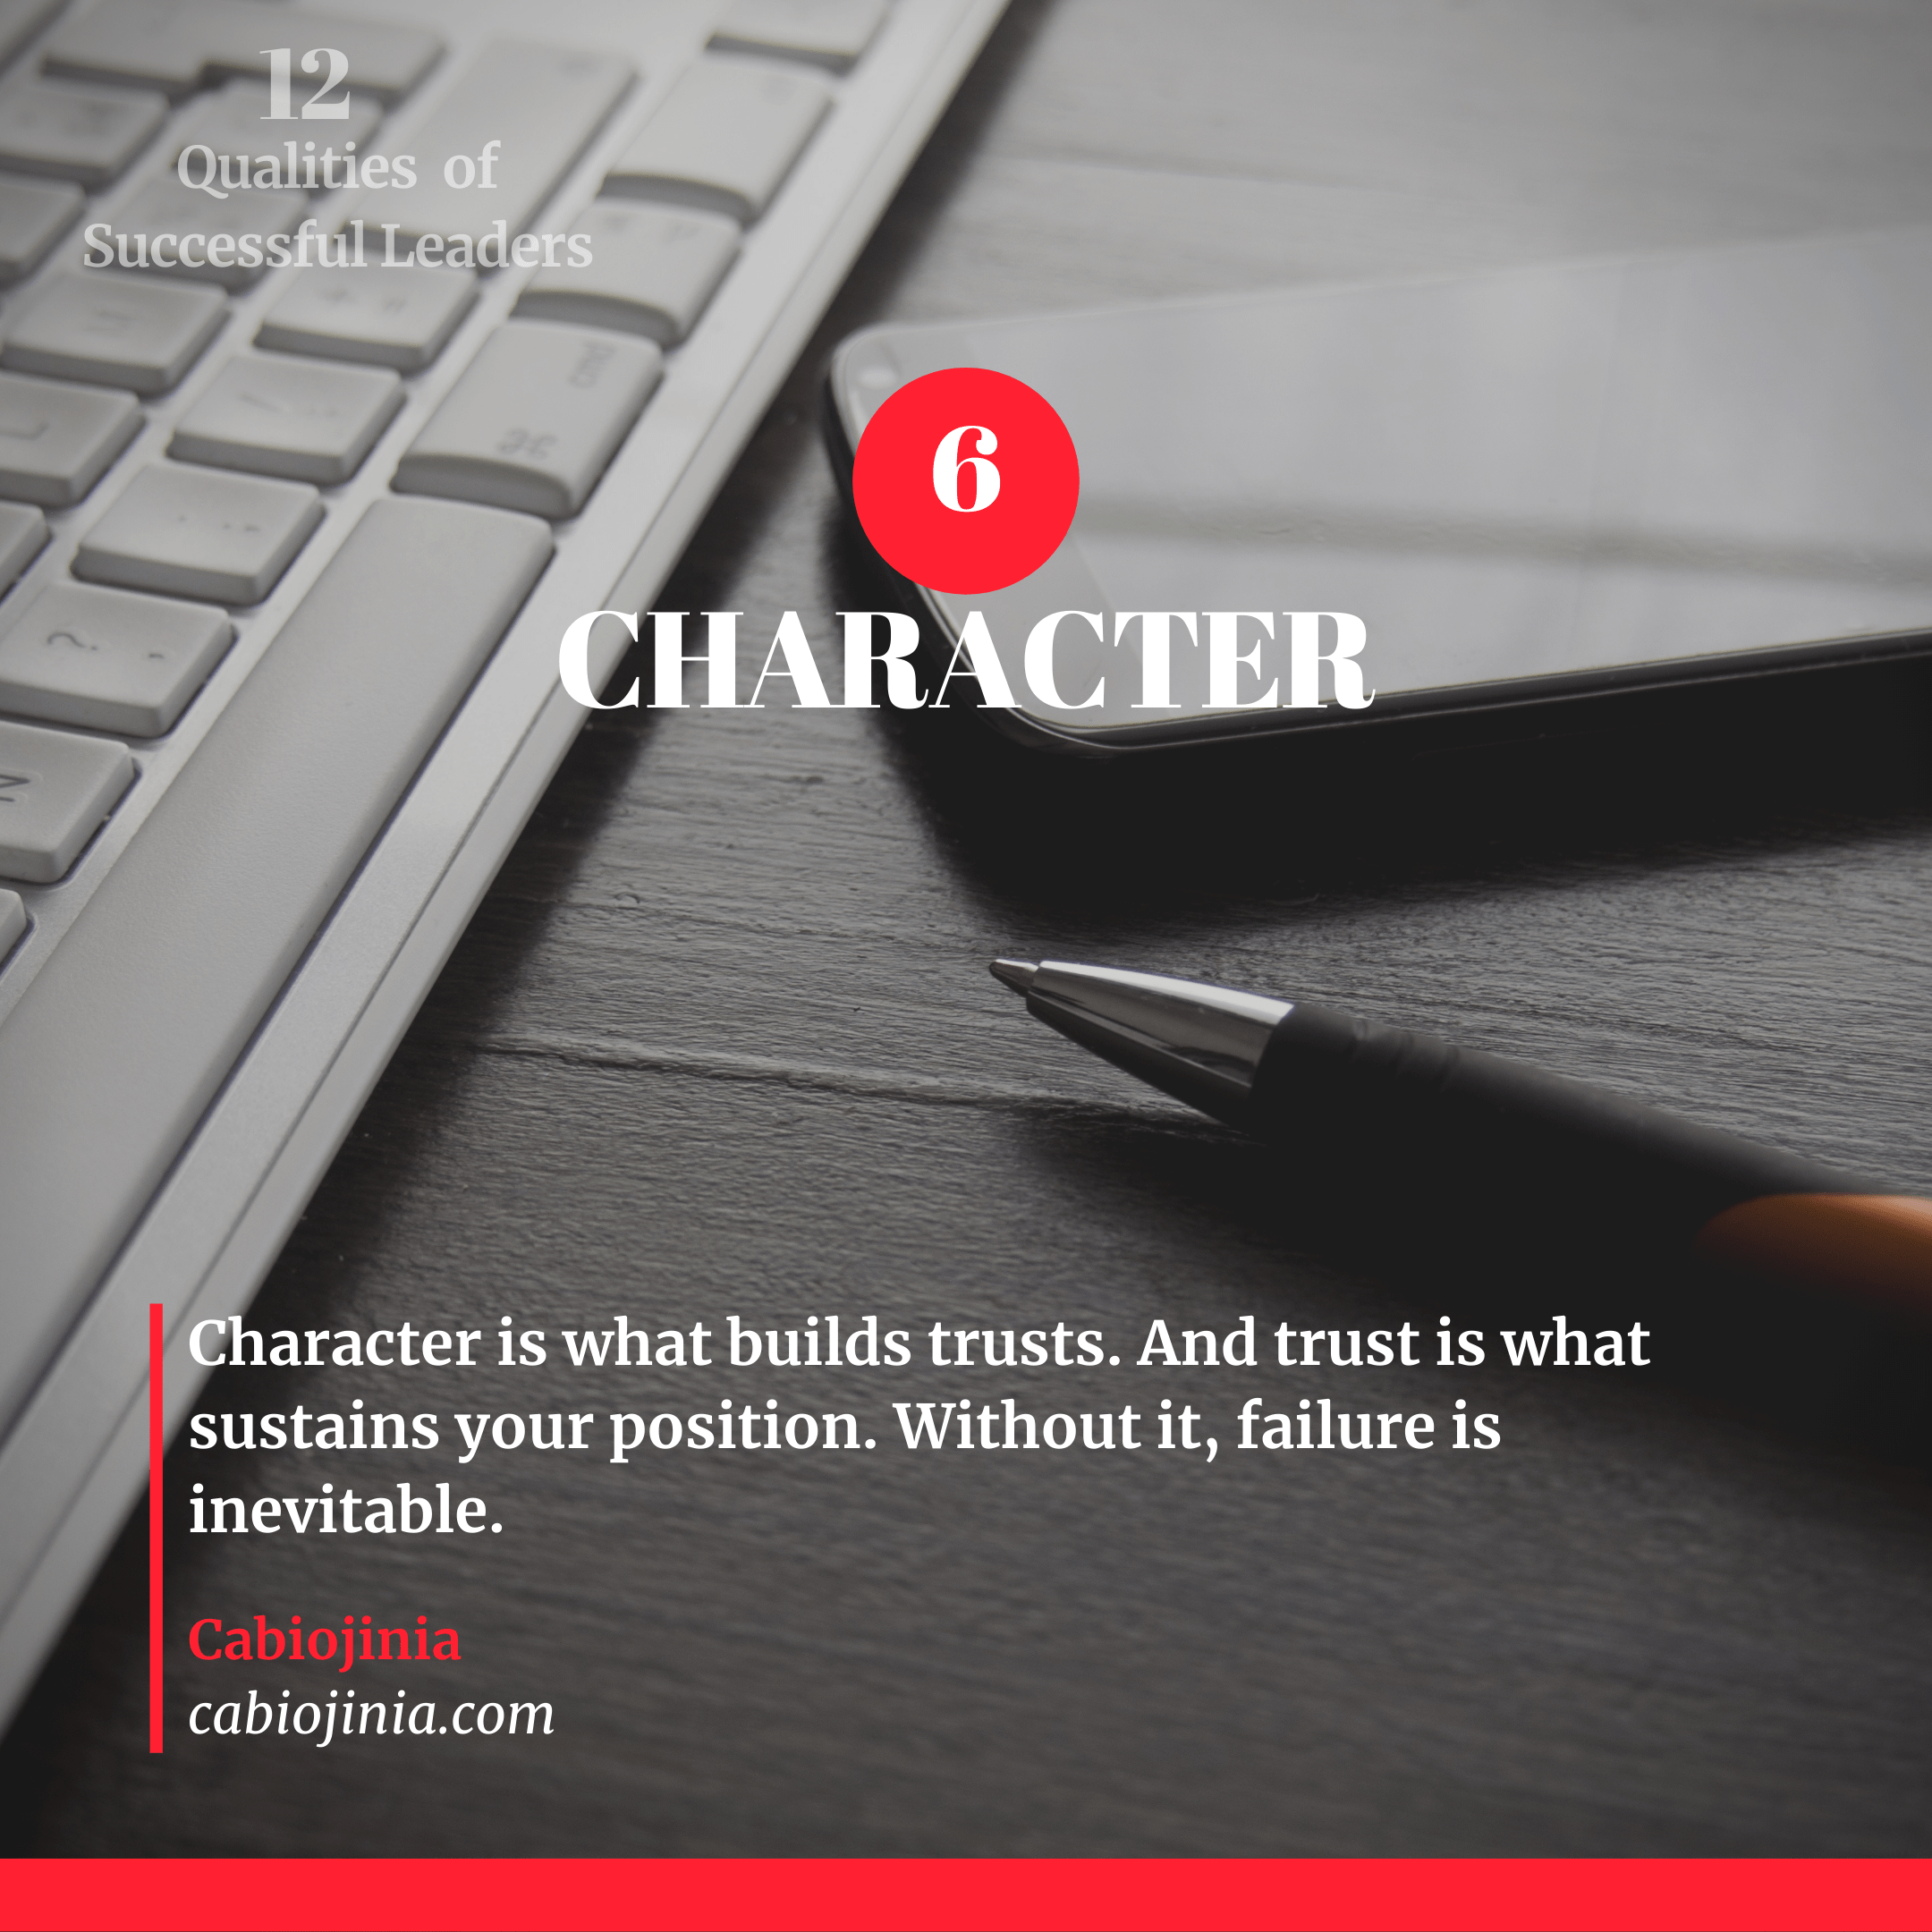 Successful leaders have character. Cabiojinia